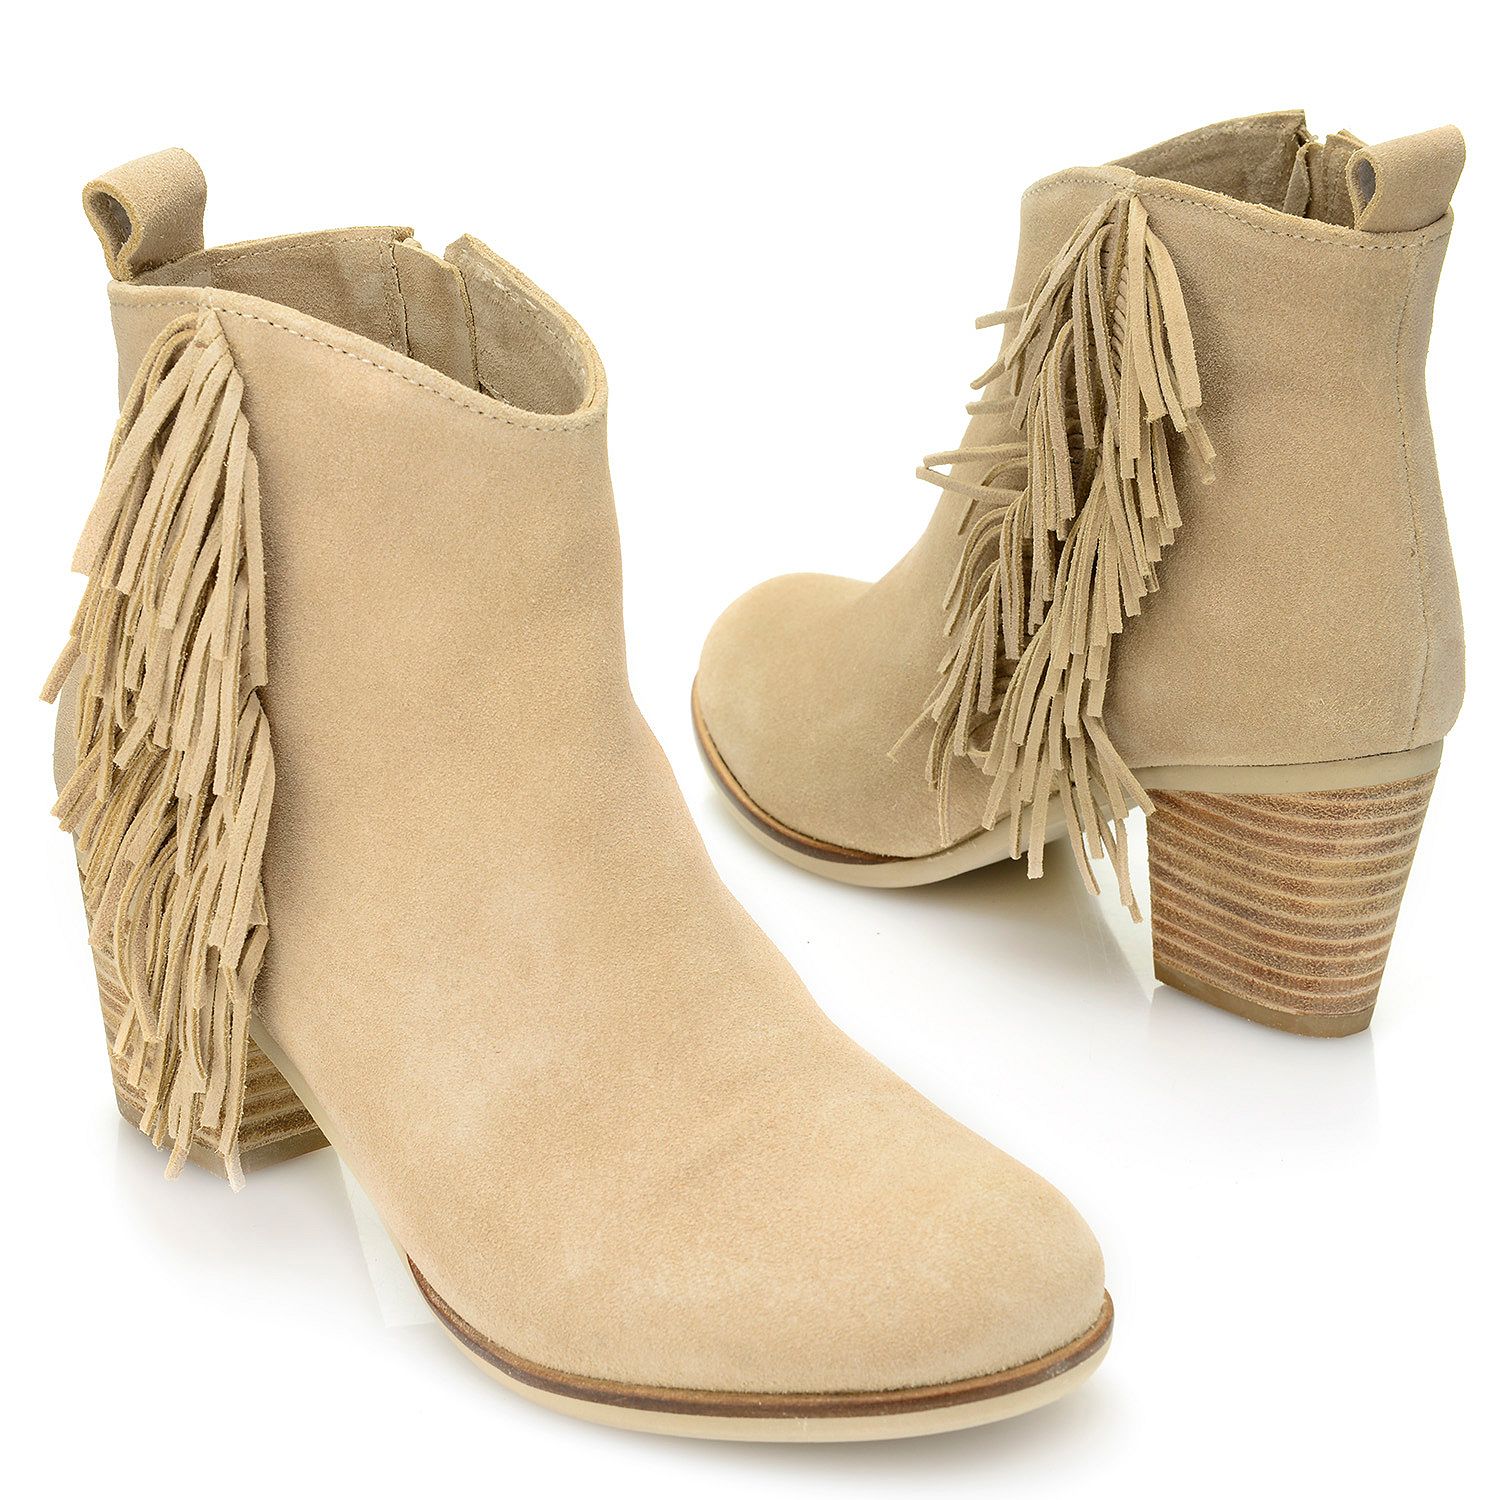 723-917- Matisse "Cloey" Suede Leather Fringe Detailed Side Zip Ankle Boots